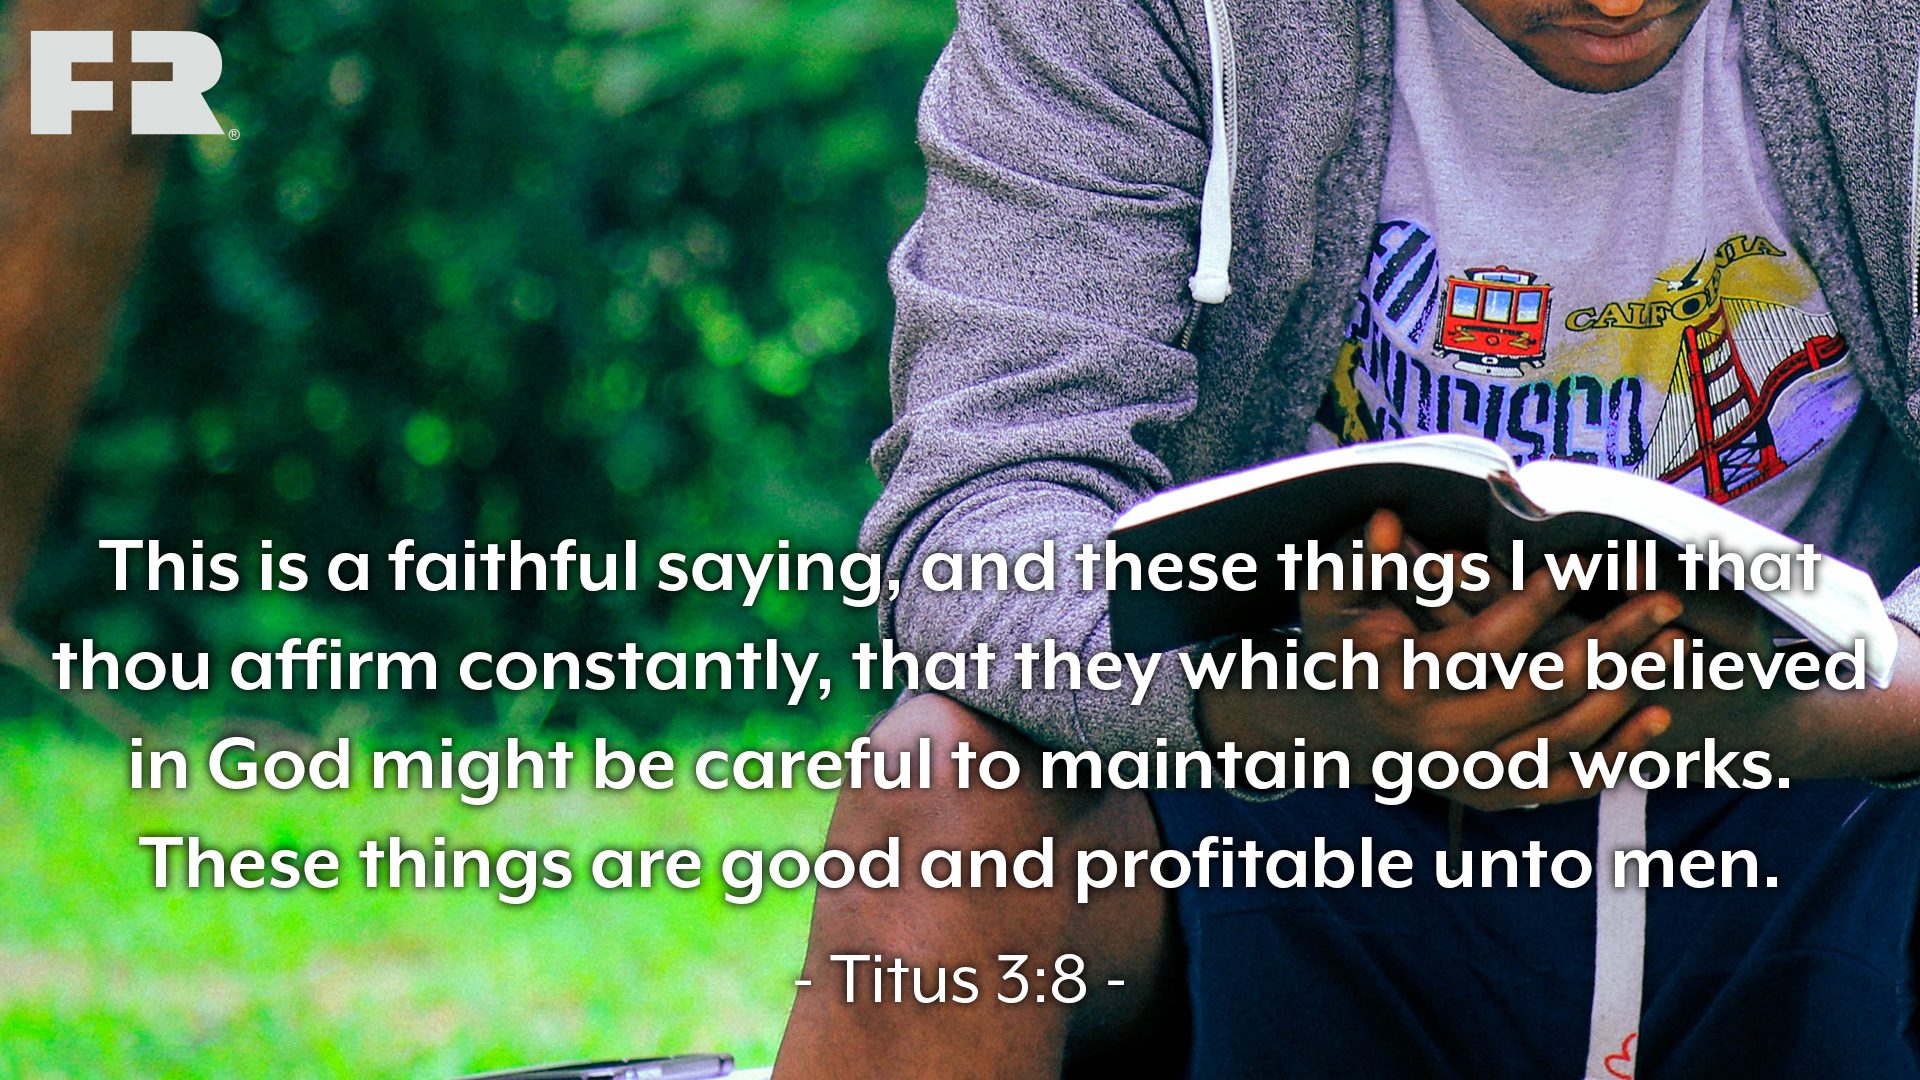 “This is a faithful saying, and these things I will that thou affirm constantly, that they which have believed in God might be careful to maintain good works. These things are good and profitable unto men.” 